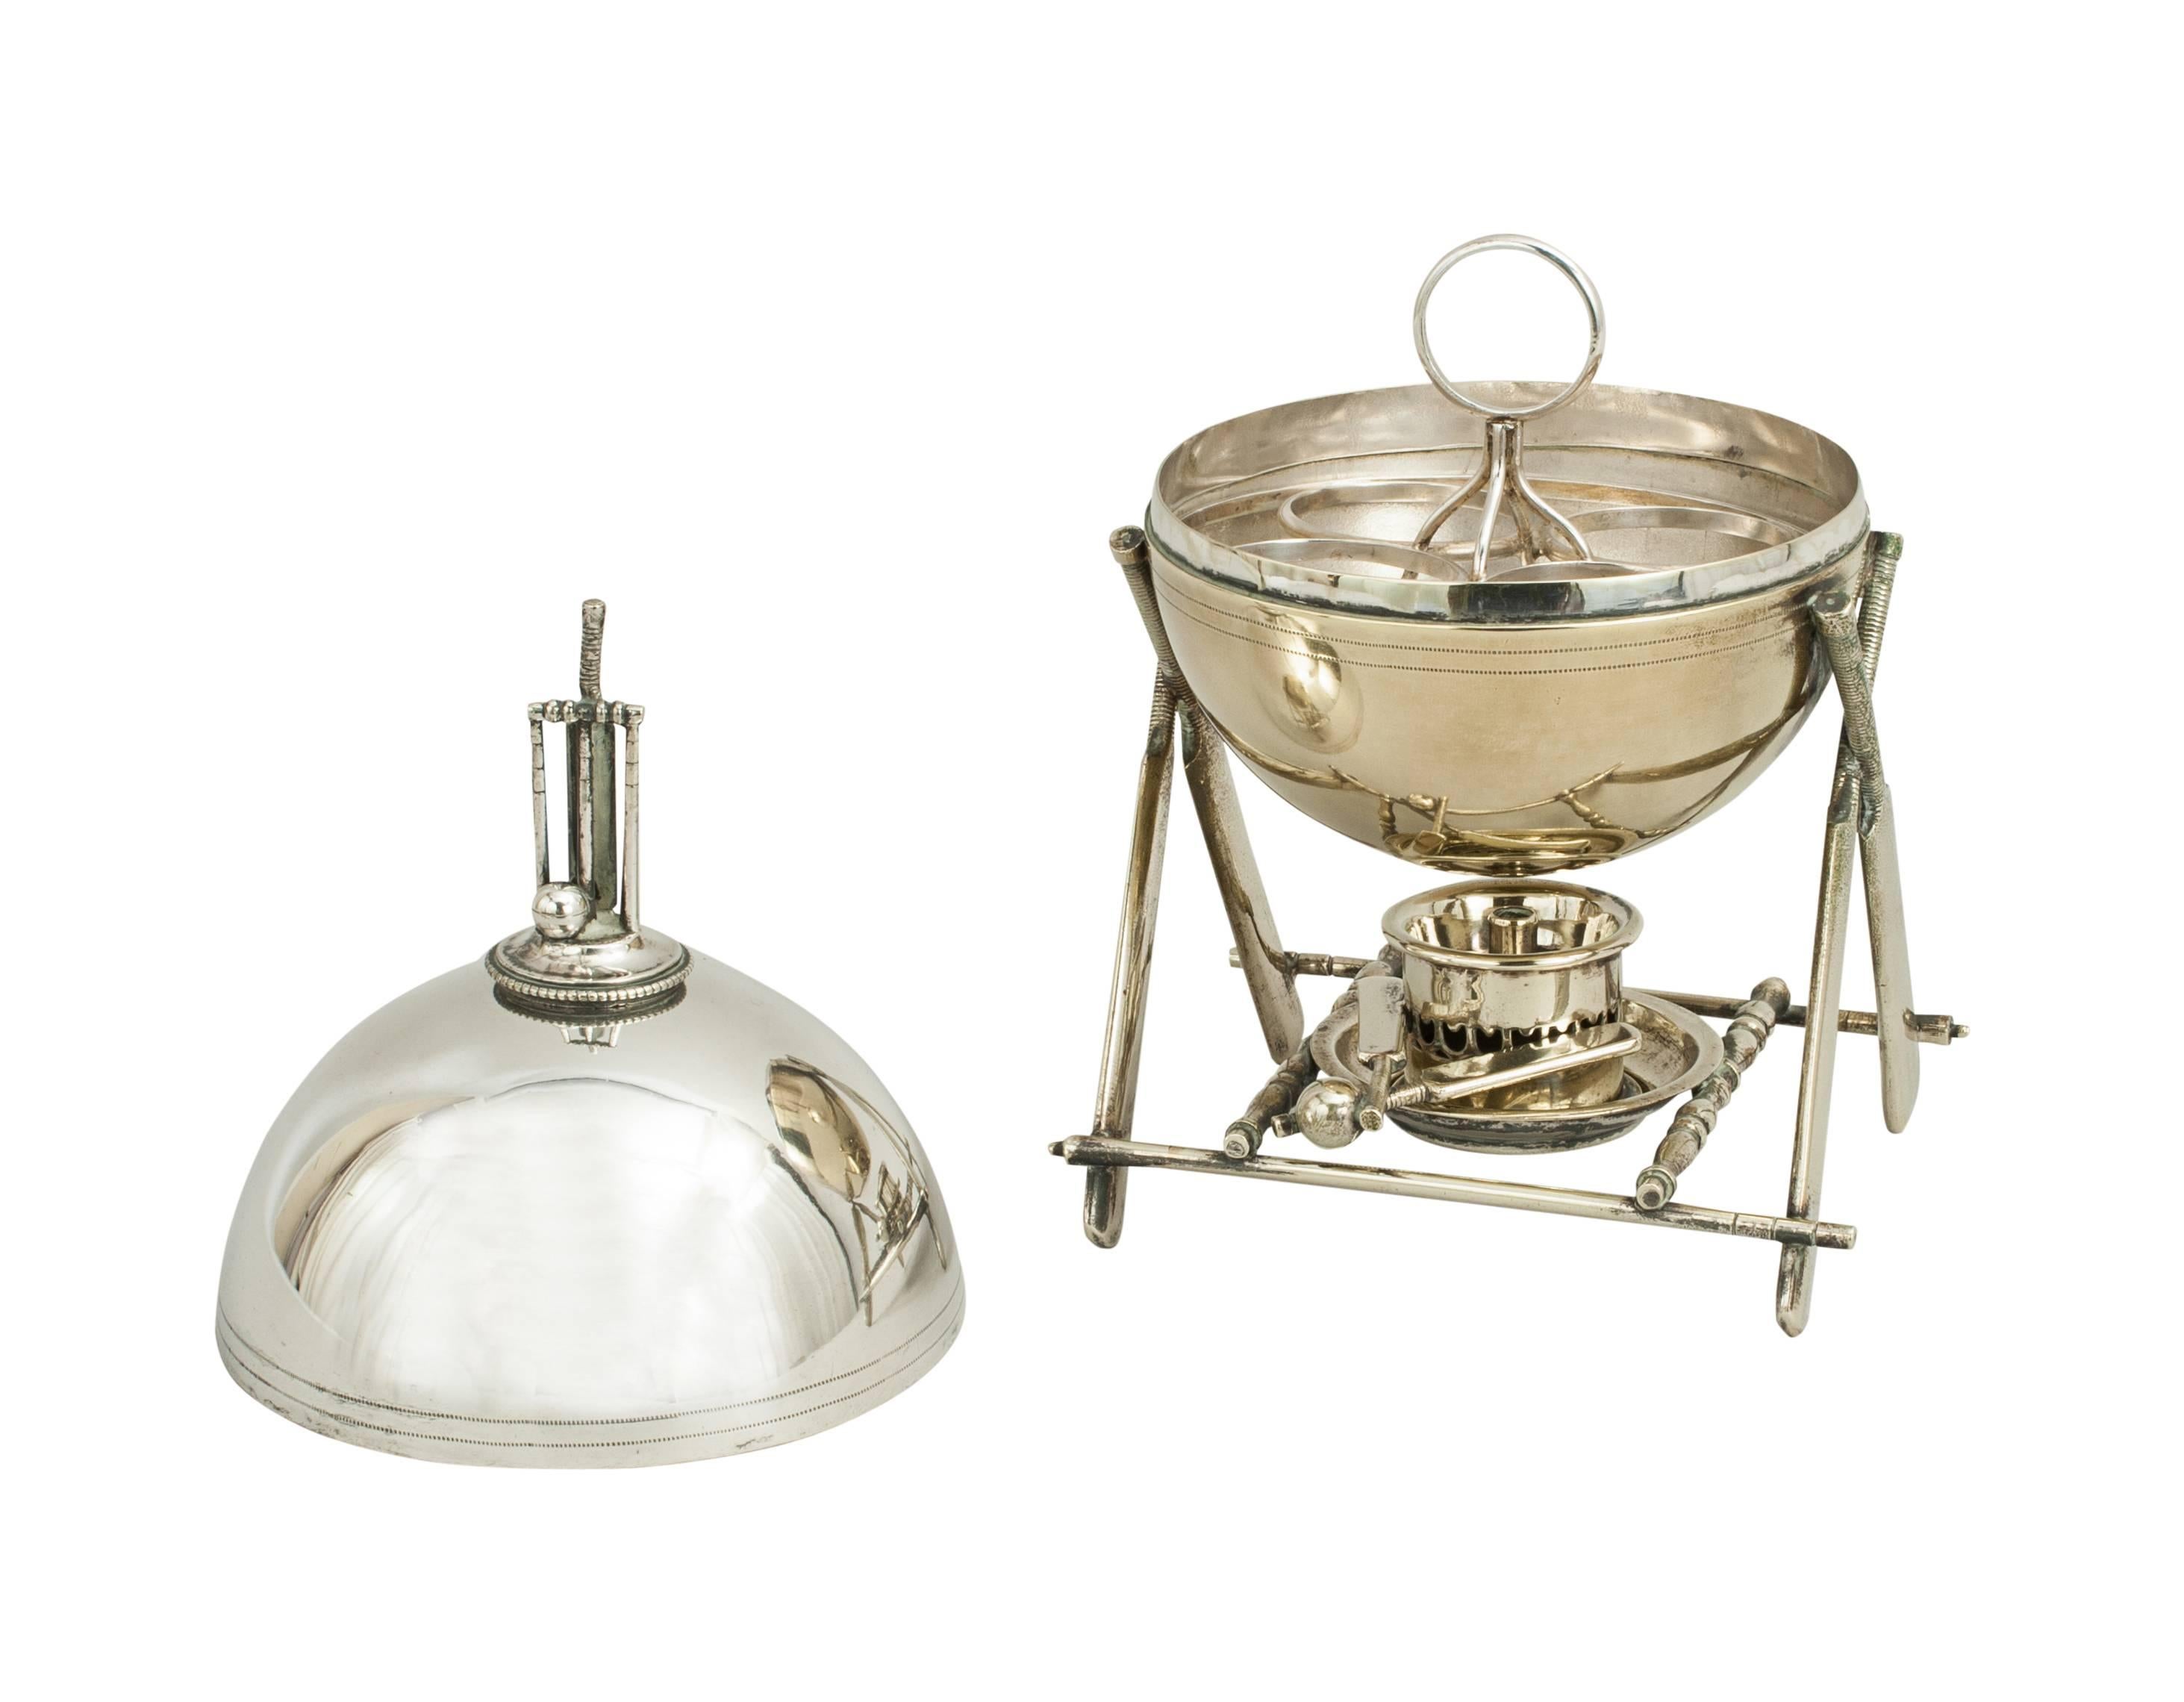 Rare cricket themed egg steamer
The silver plate egg steamer, boiler (or egg coddler) is in the shape of a cricket ball. The steamer can be used to boil or coddle one or more eggs. The cricket ball contains a four ring frame for holding the eggs